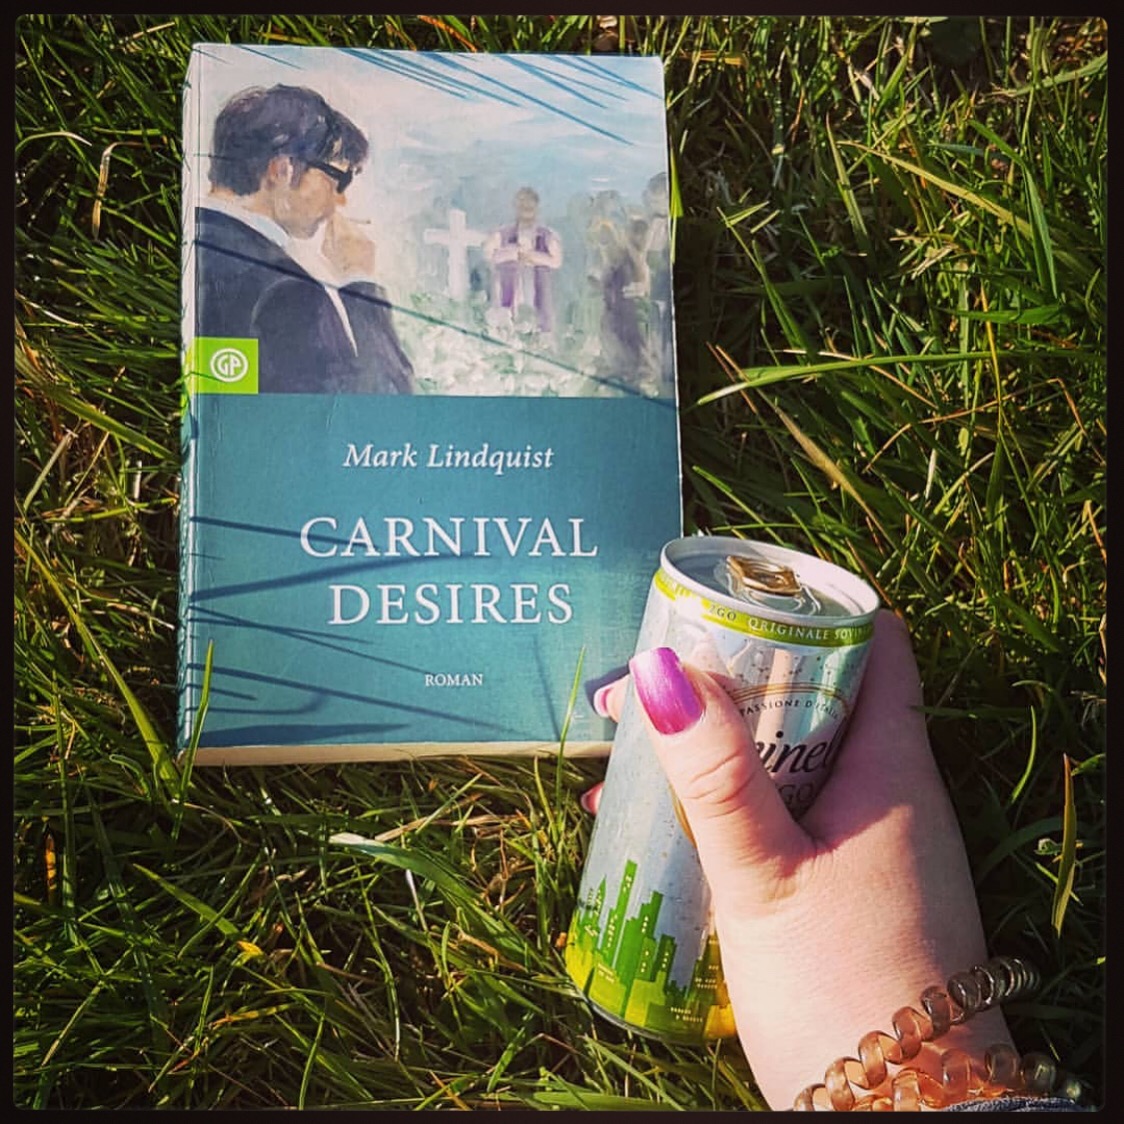 Carnival Desire by Mark Lindquist, German Edition